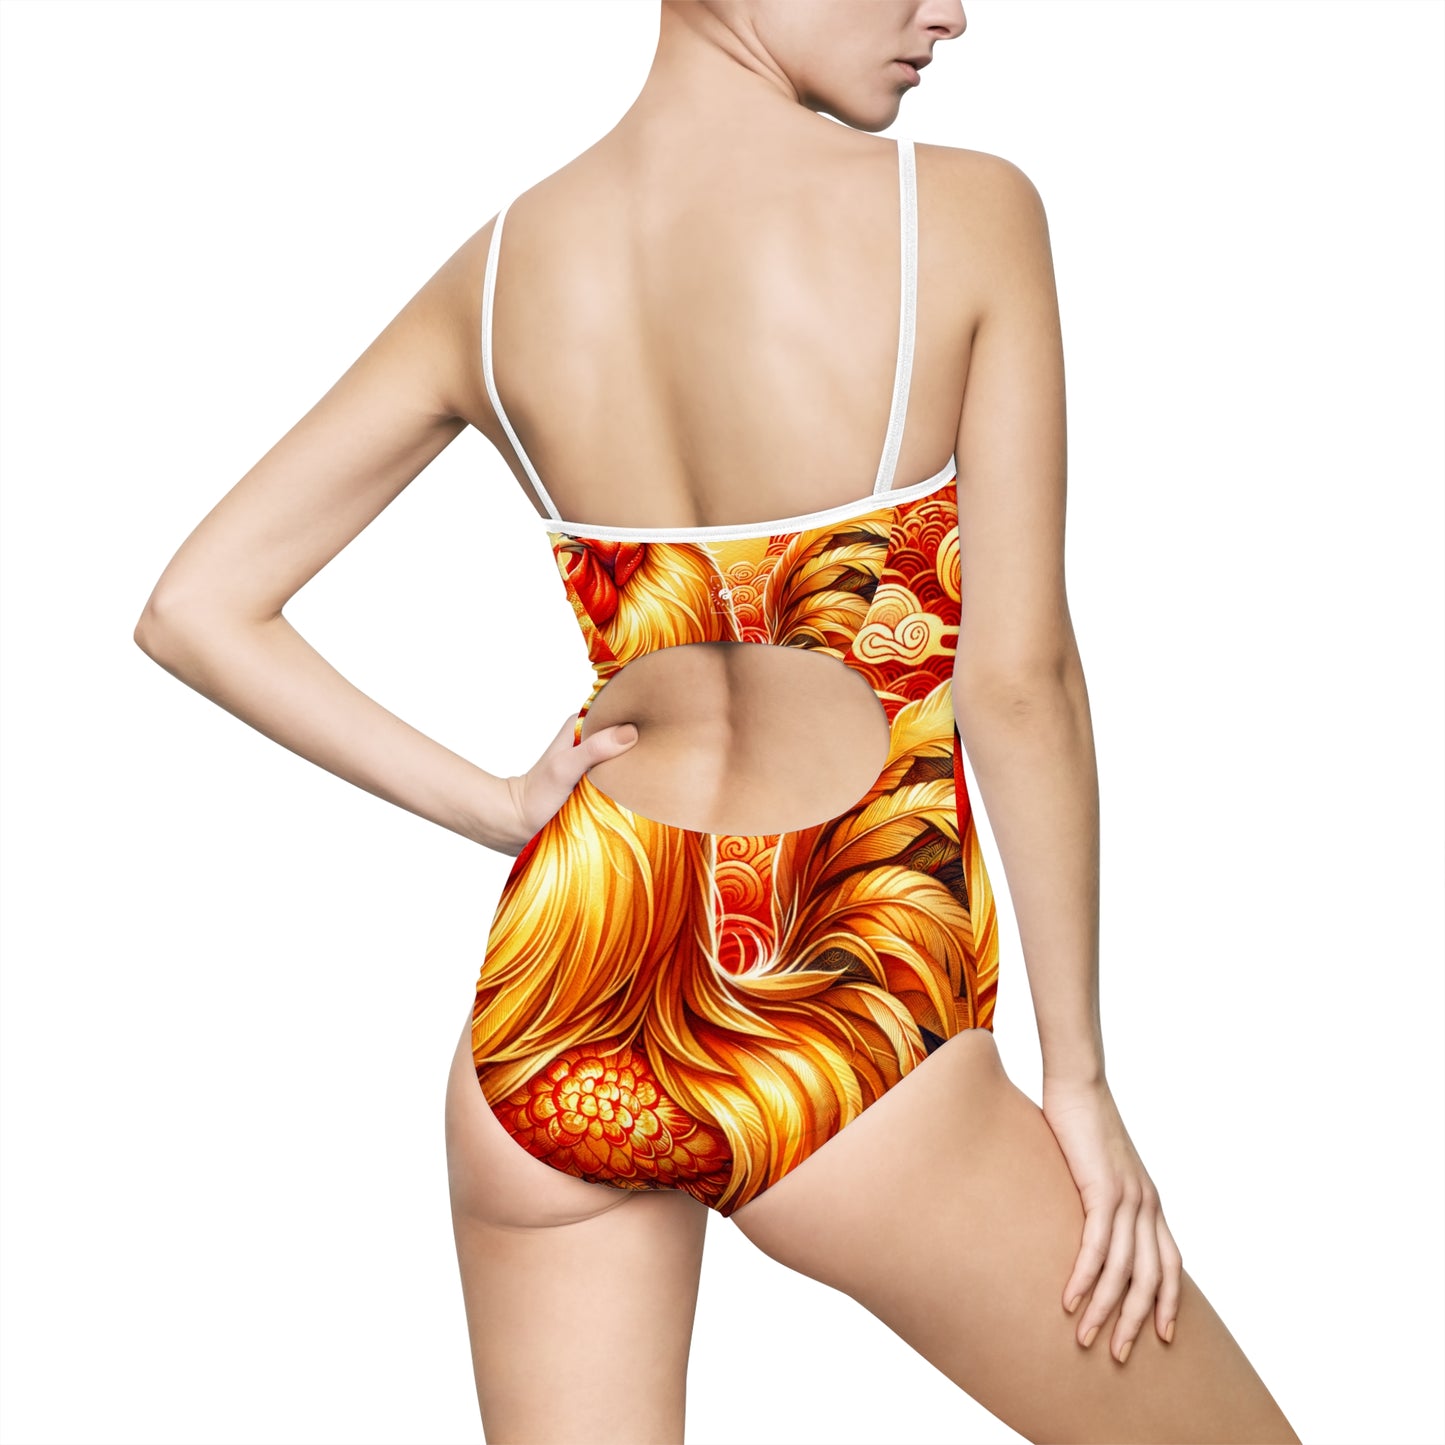 "Crimson Dawn: The Golden Rooster's Rebirth" - Openback Swimsuit